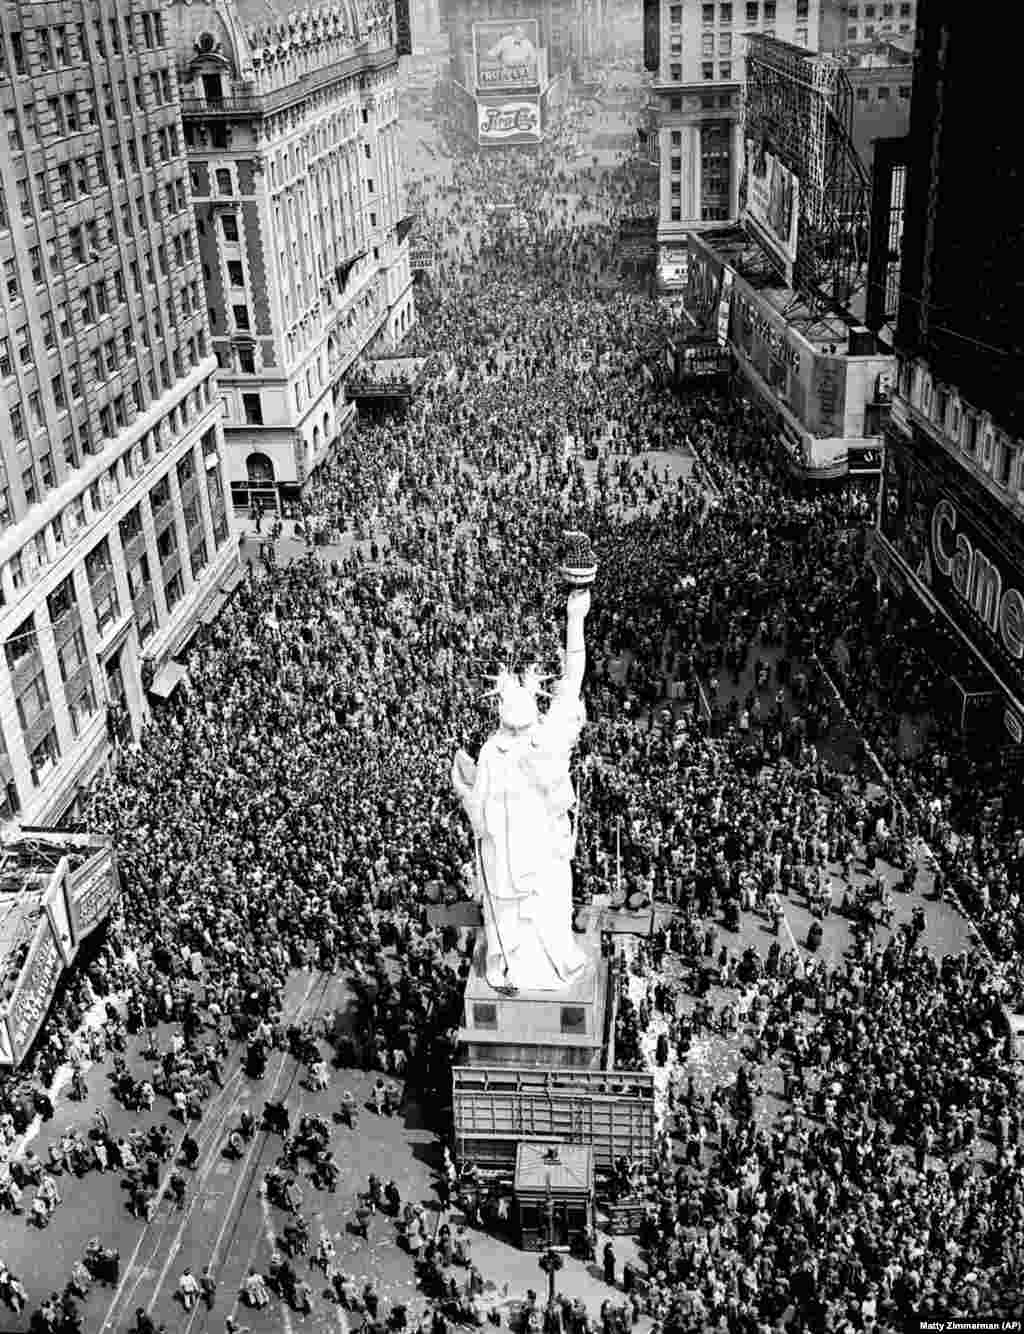 Crowds gather under a replica of the Statue of Liberty on Times Square. A reporter described the giddy scene: &ldquo;Here and there, a tipsy civilian &ndash; sometimes a serviceman &ndash; offered drinks to strangers. The drinks were eagerly accepted, mostly by teenagers.&rdquo;